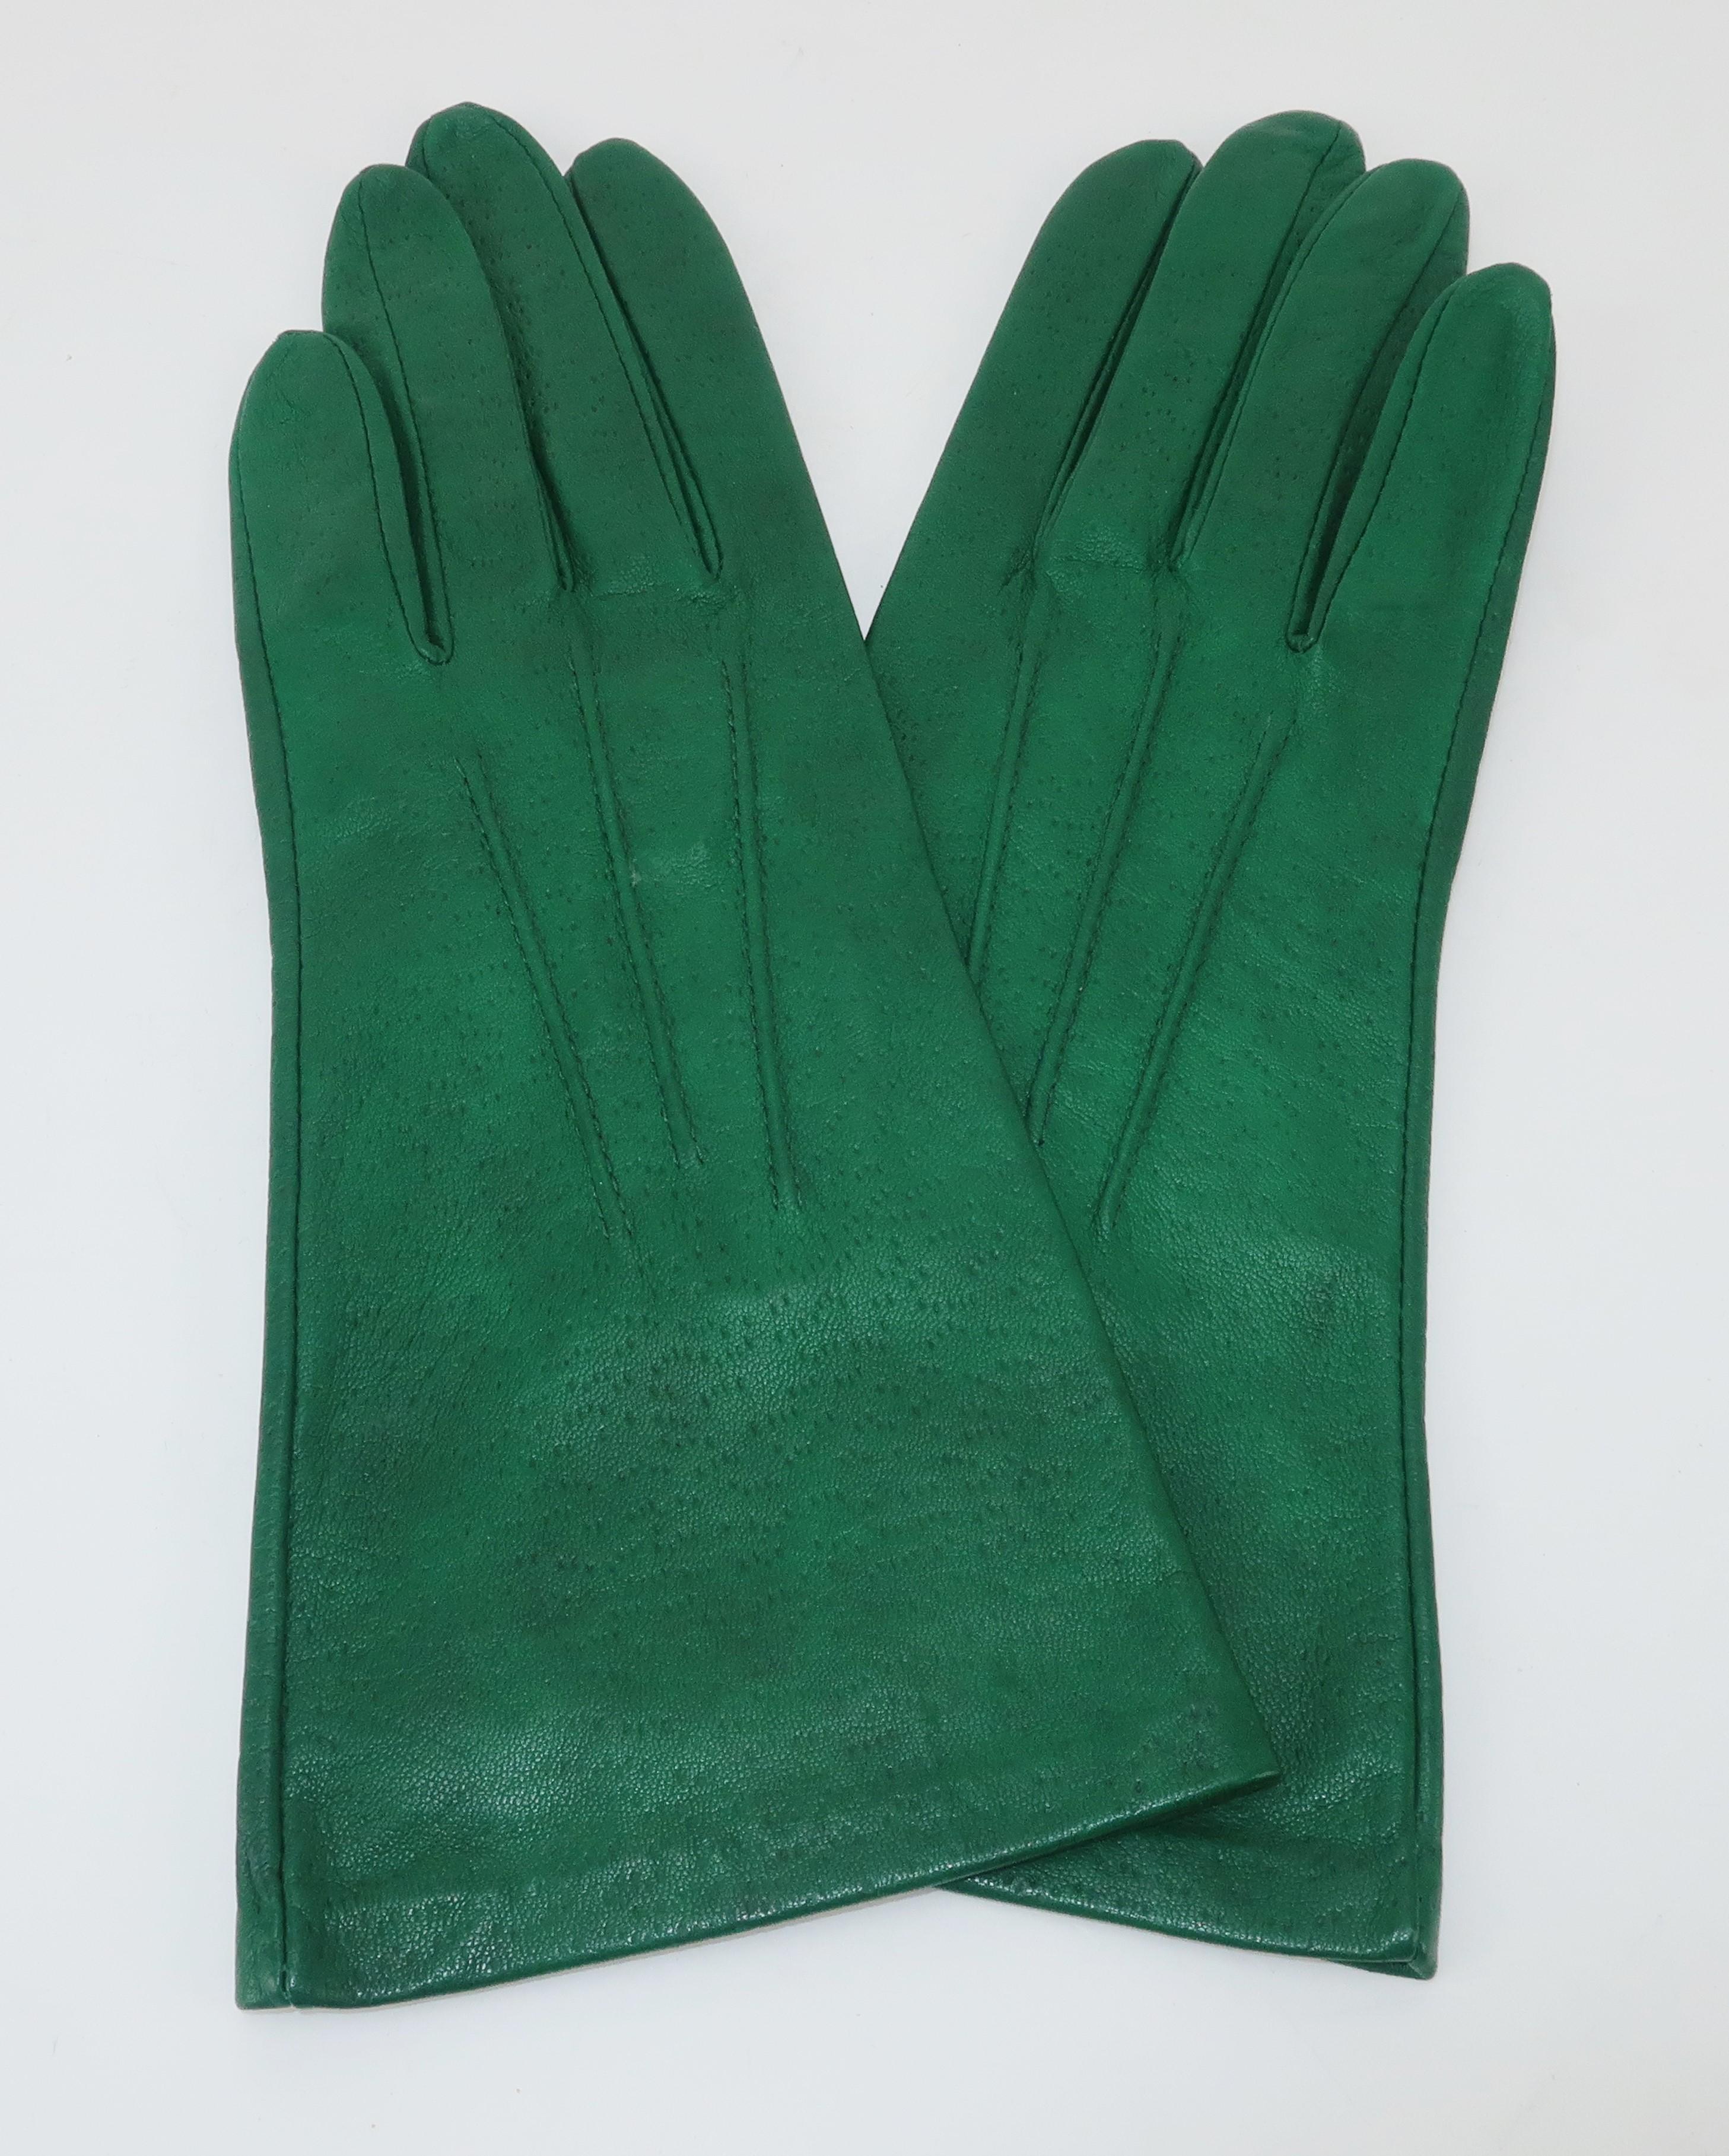 These classy emerald green leather gloves will add a touch of elegance to your winter wardrobe.  The gloves feature a subtle texture and pintuck style stitching across the top of the hand.  The longer length is perfect for covering your wrists and